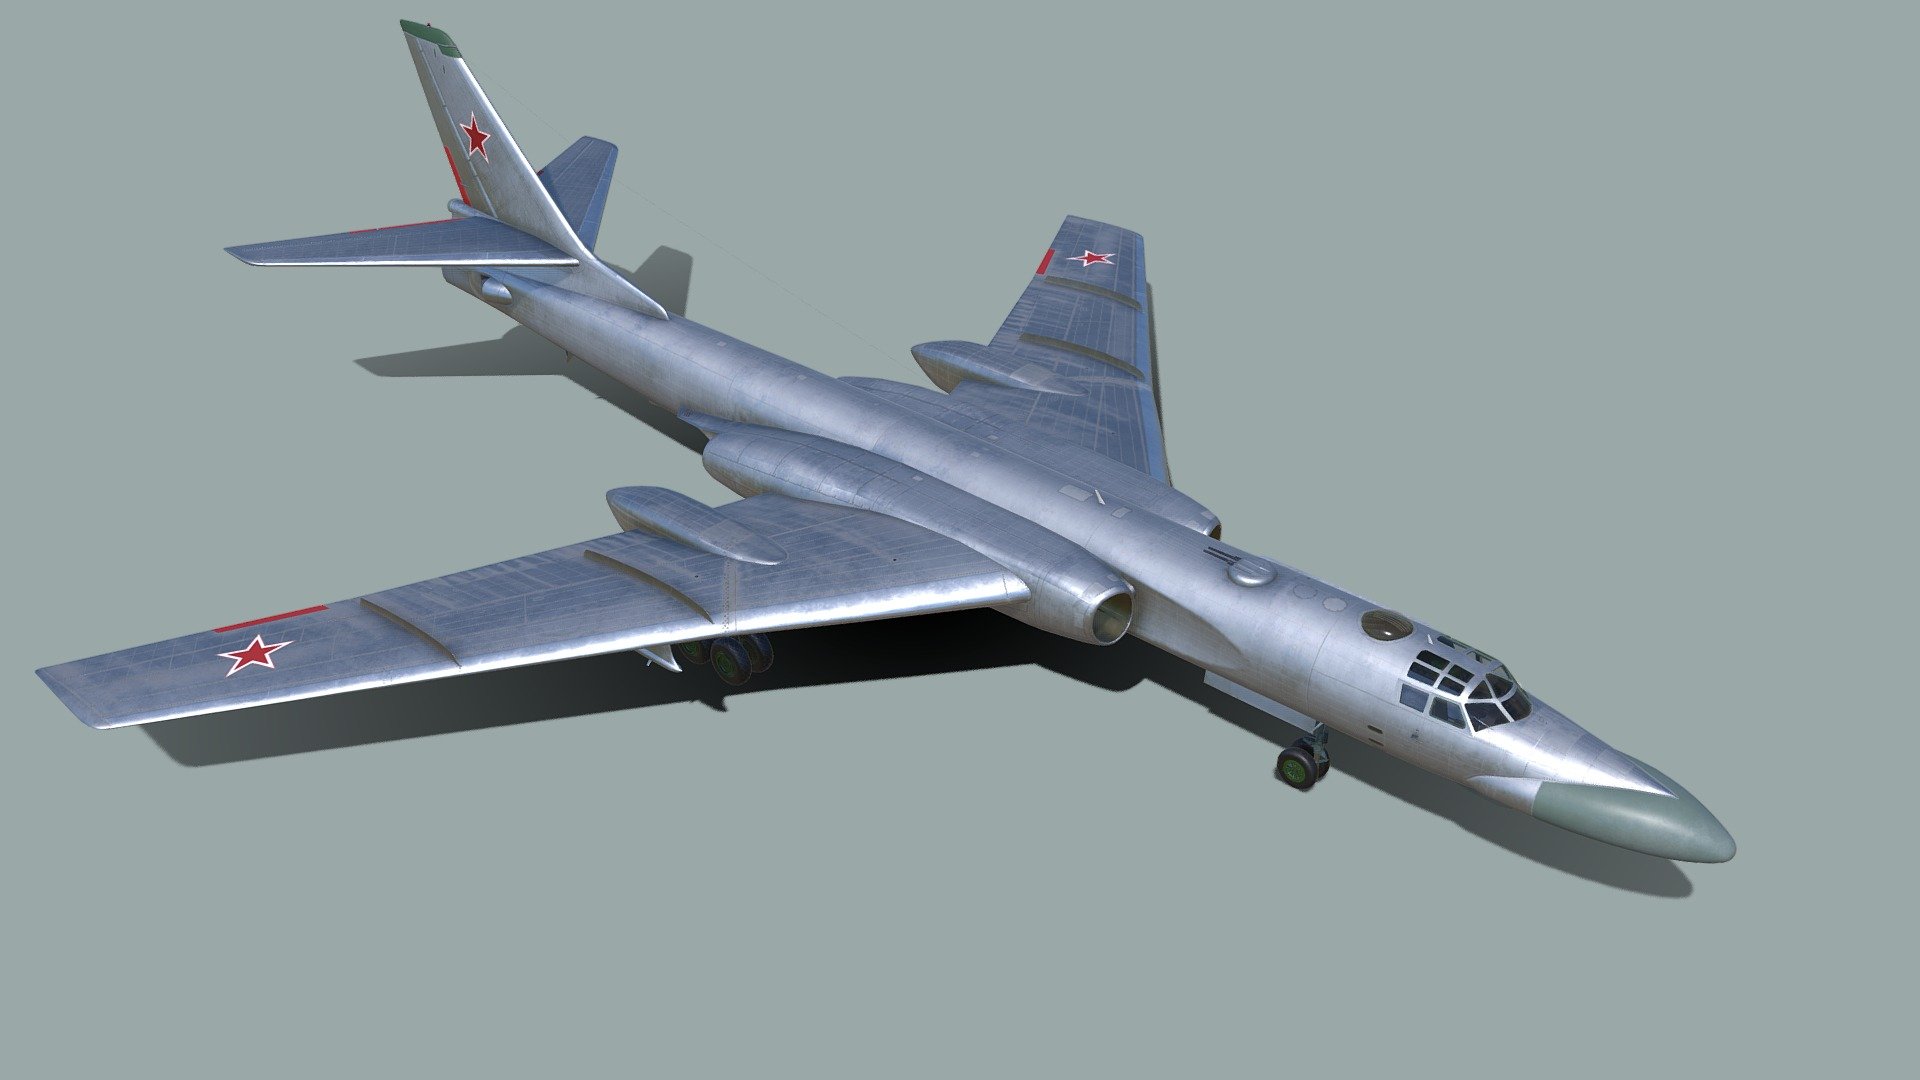 The Tupolev Tu-16 (NATO reporting name: Badger) was a twin-engined jet strategic heavy bomber used by the Soviet Union. It has flown for more than 60 years, and the Chinese licence-built Xian H-6 remains in service with the People’s Liberation Army Air Force. Badger C (Tu-16K-10) – Another Naval Aviation variant, units of this version carried a single AS-2 Kipper/K-10S anti-ship missile. 216 built in 1958–1963. It differed from other variants in having a radar in a nose. A further development, the Tu-16K-10-26, carried a single K-10S and two KSR-2 or KSR-5 AS-6 Kingfish missiles (K-26 missile complex). Some were later converted into ELINT platforms 3d model